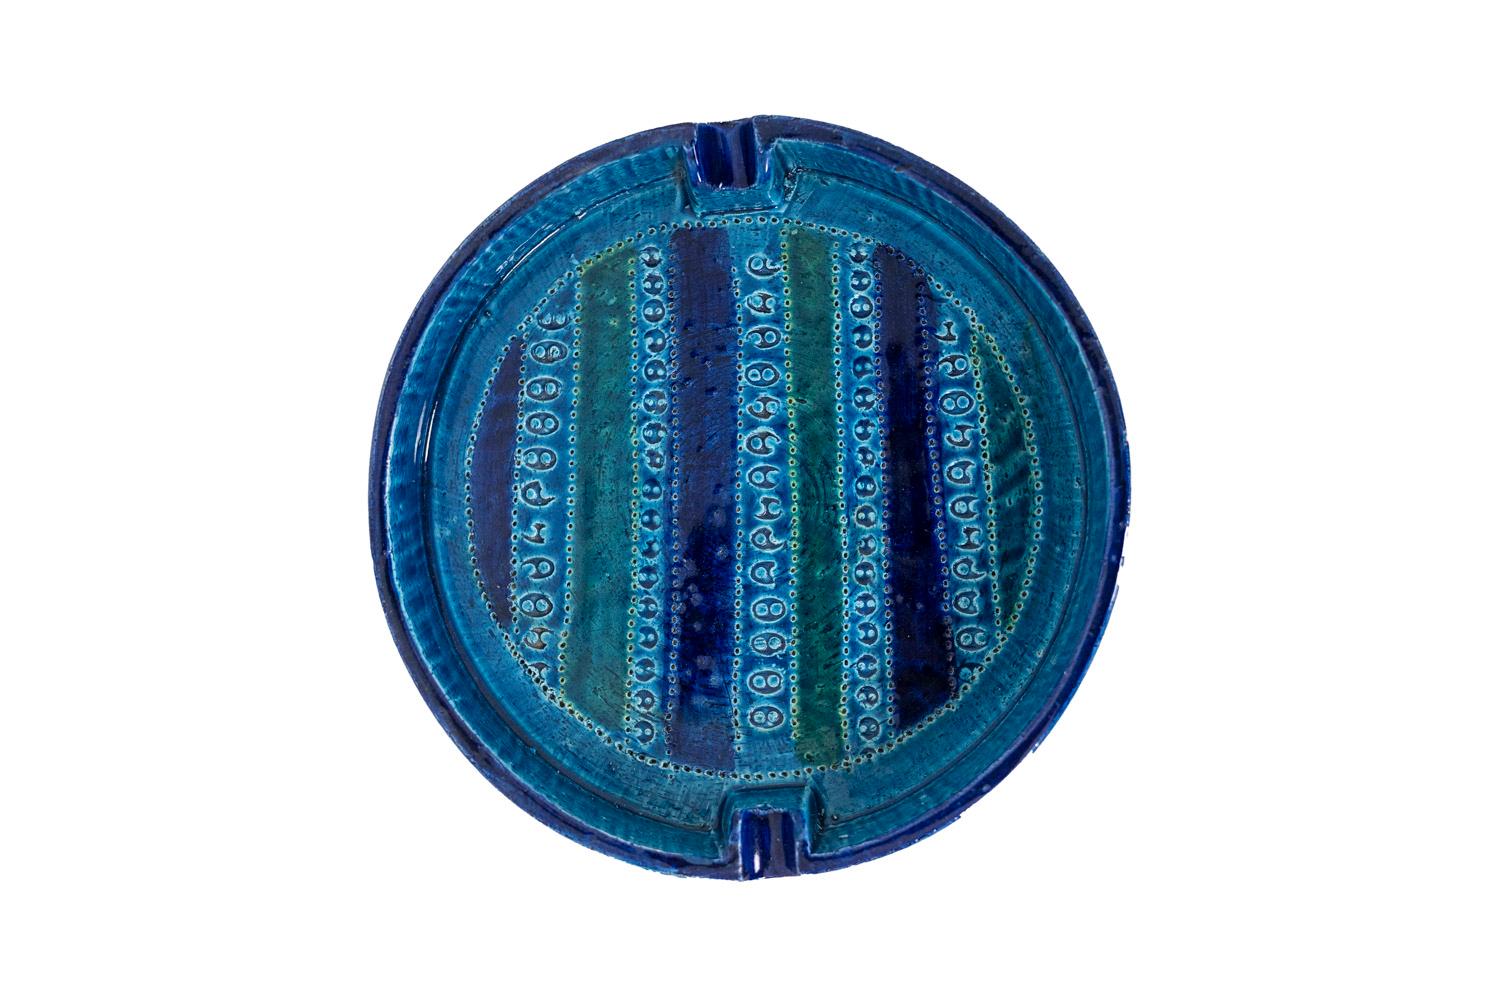 Aldo Londi, attributed to. 
Bitossi, edited by. 

Ashtray, or storage compartment, in ceramic in blue color, adorned with abstract motifs and friezes.

Italian work realized in the 1970s.